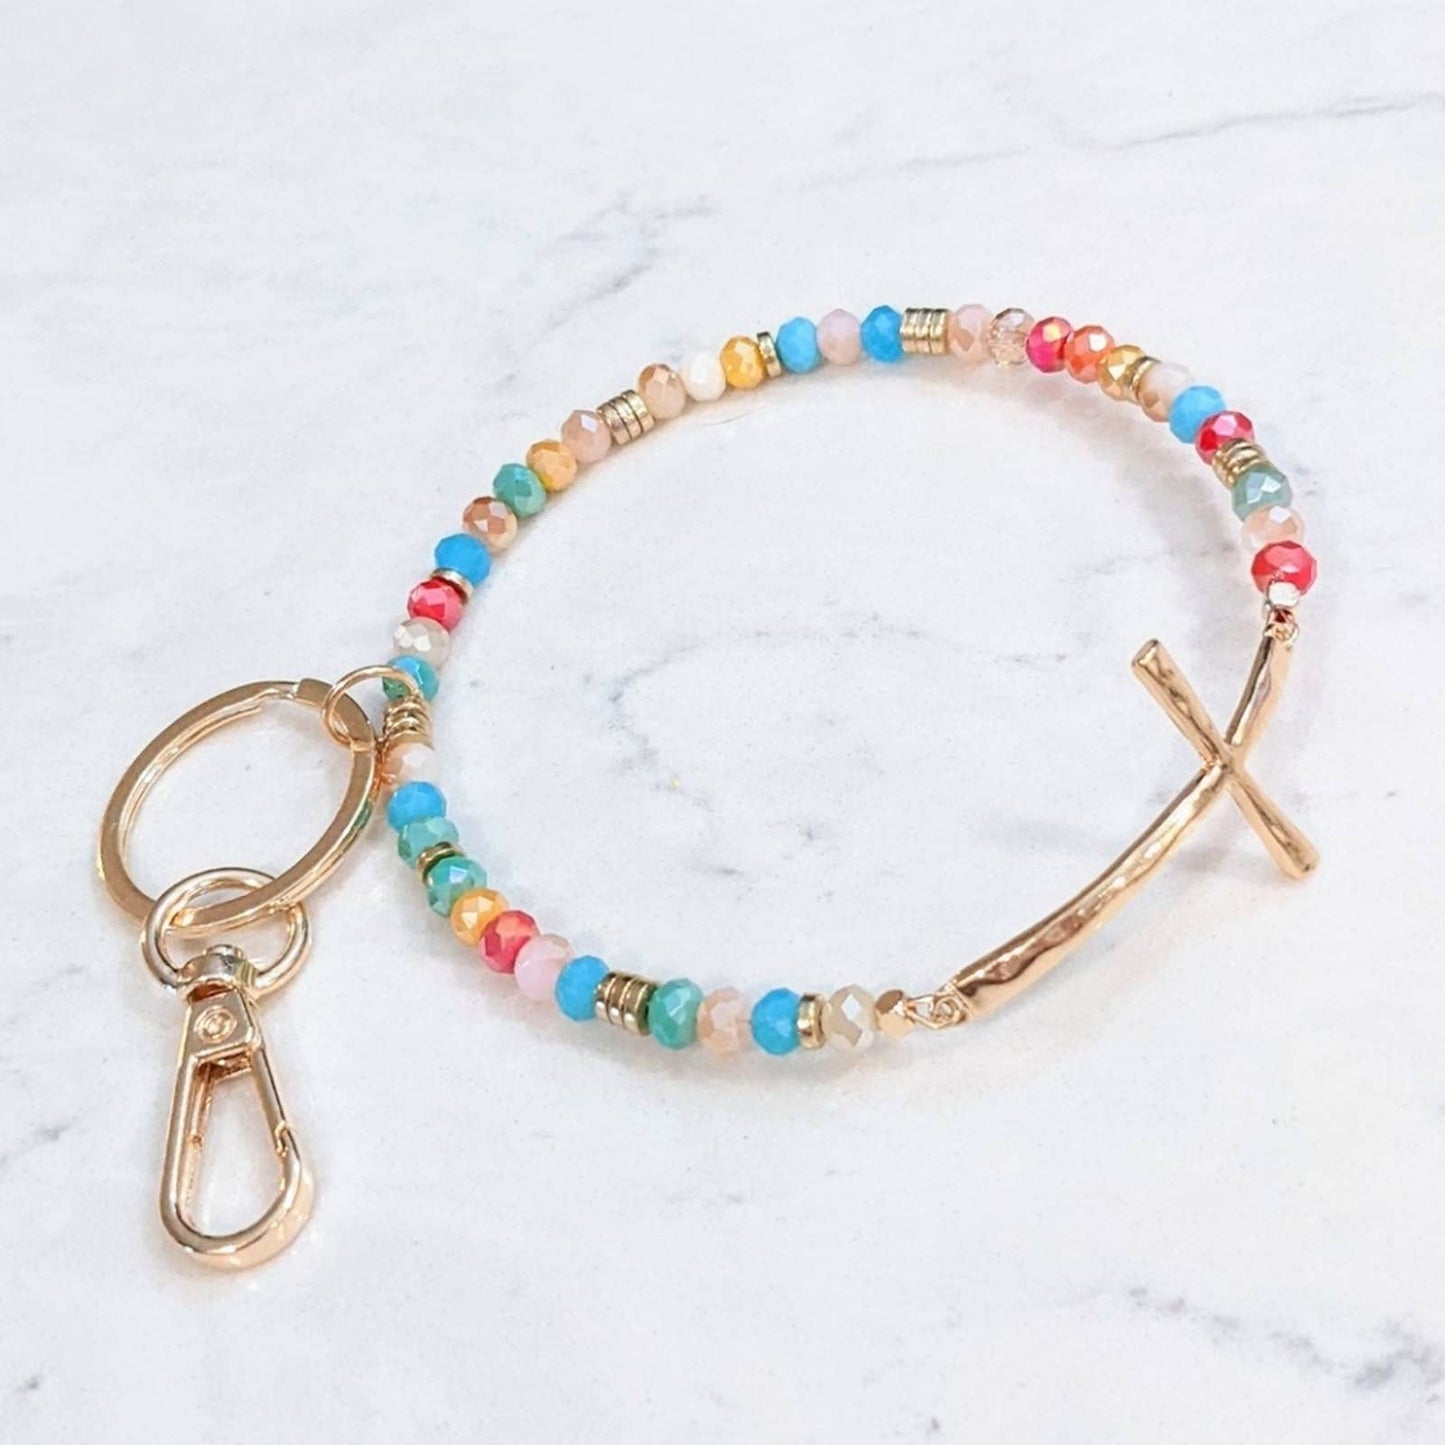 GOLD TONE CROSS Glass Bead Bracelet Style Hoop Key Chain with Closed Hook